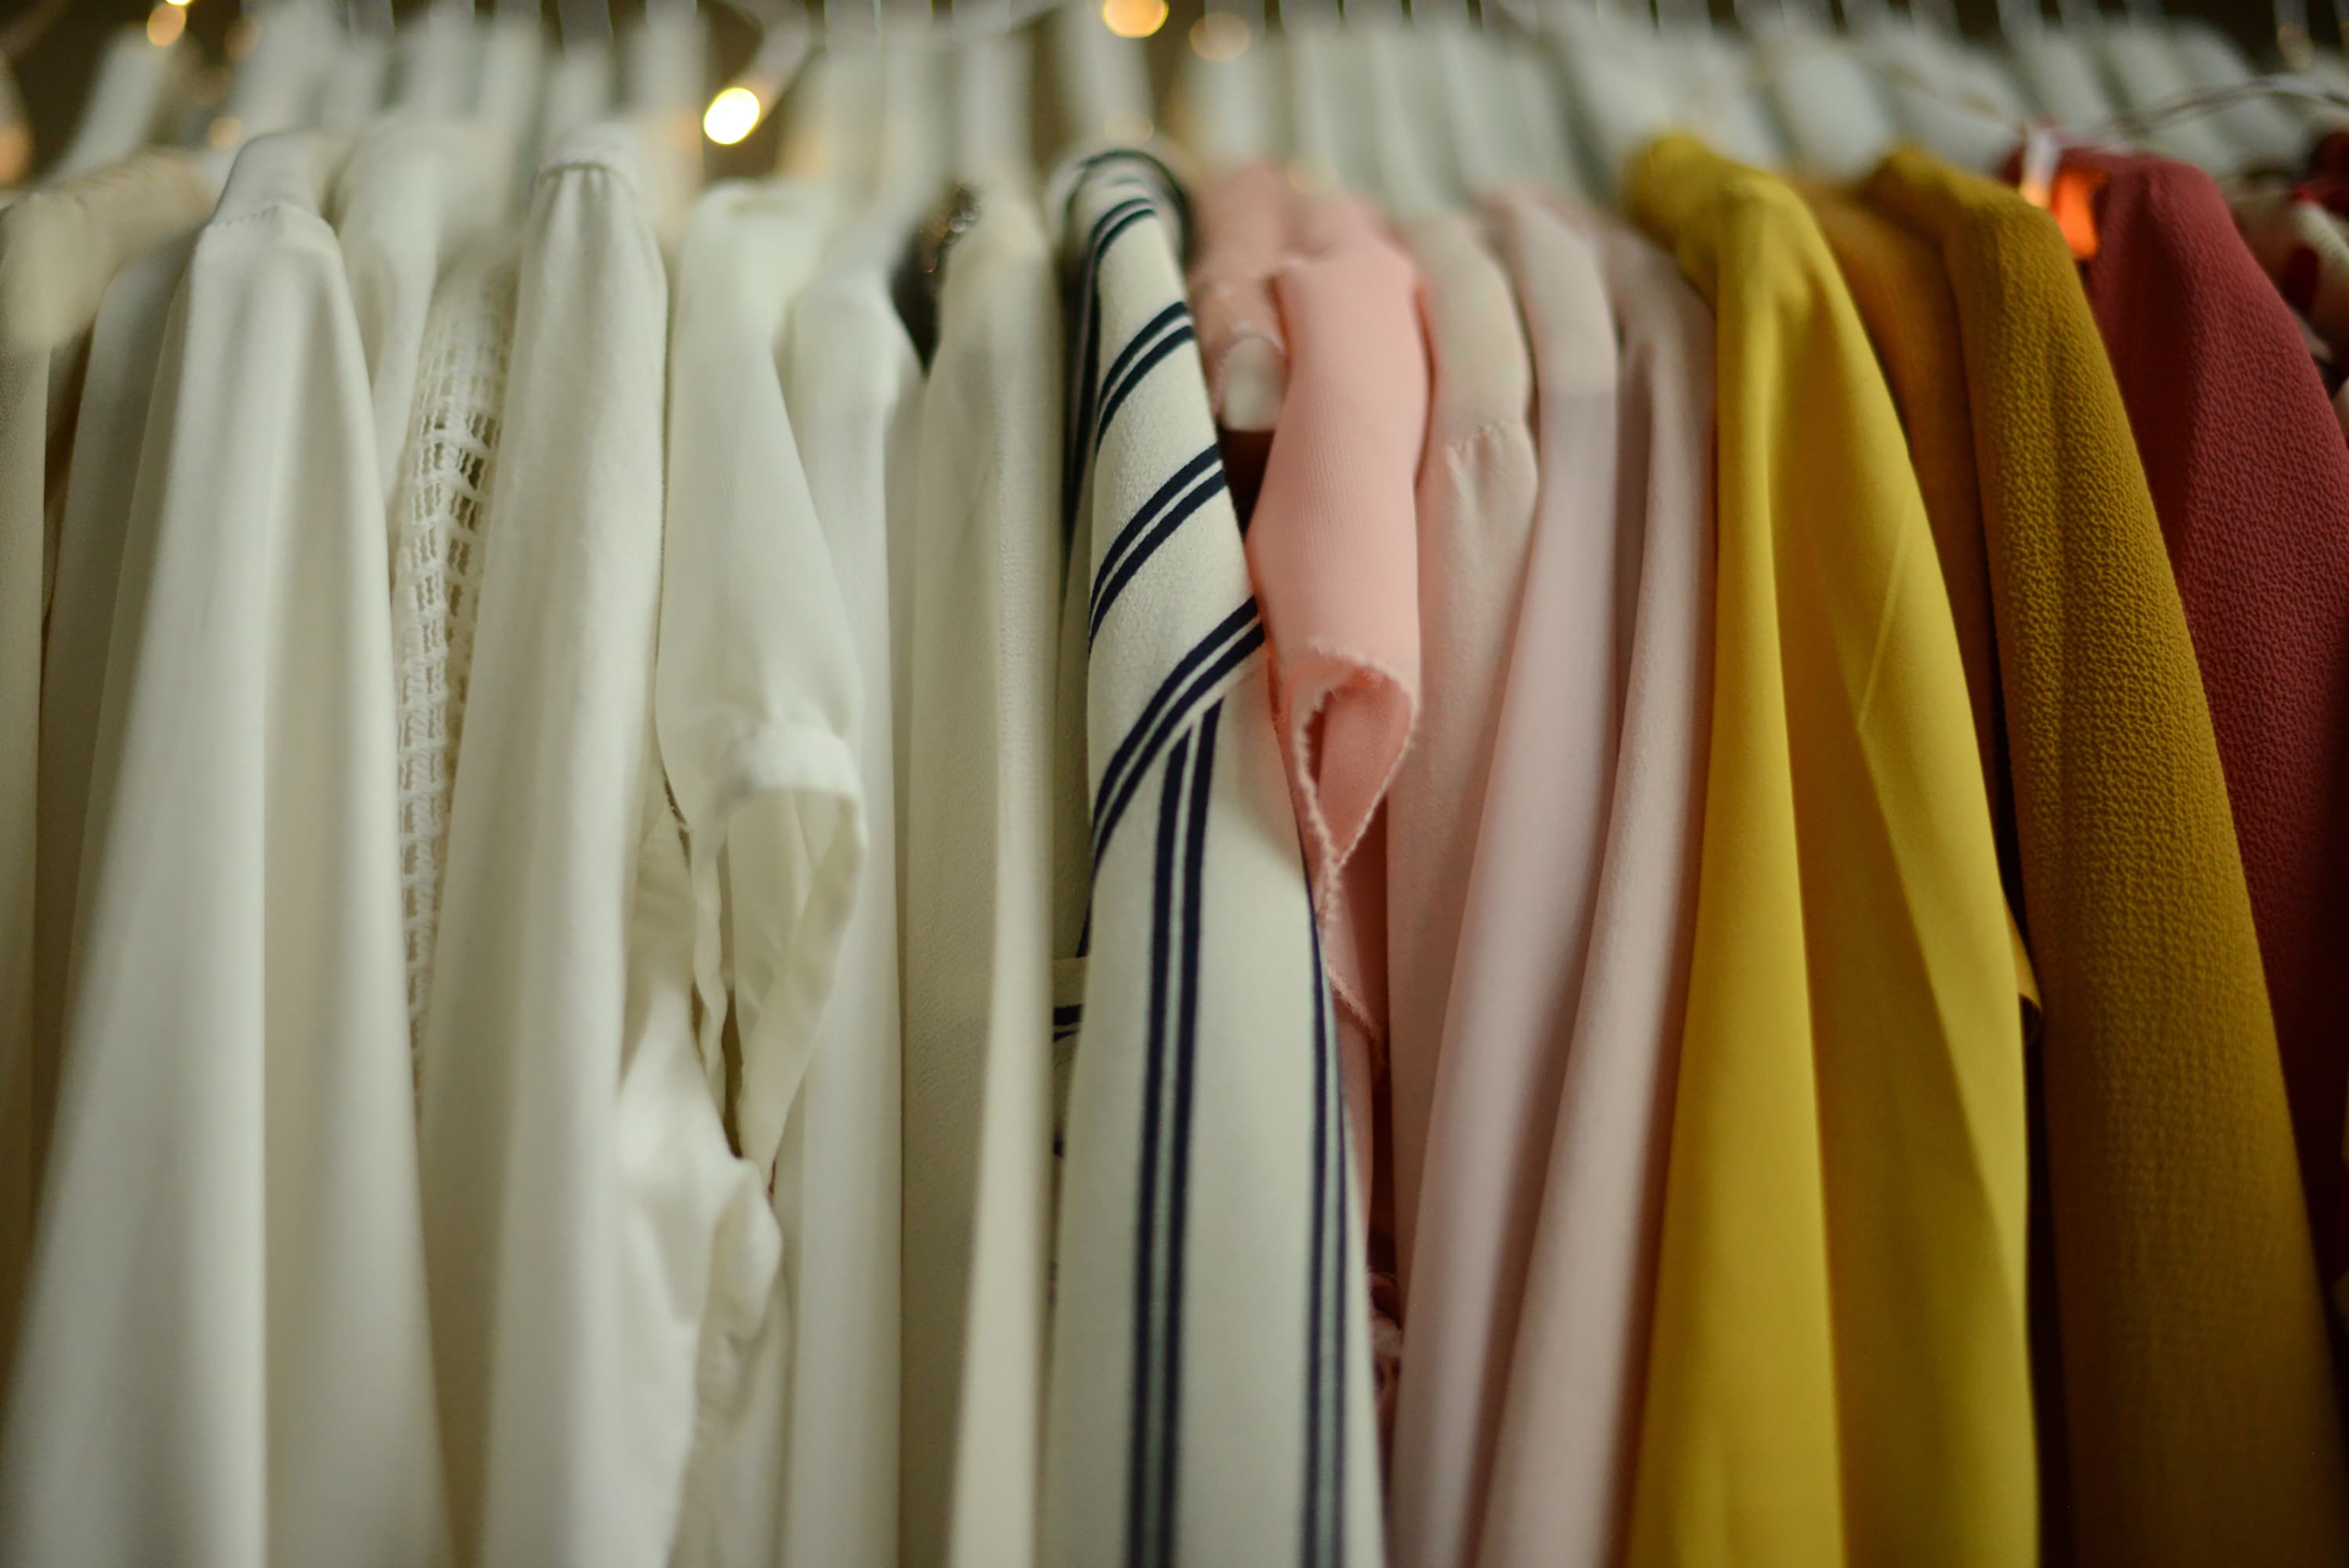 7 Steps to a Color-Coordinated Closet